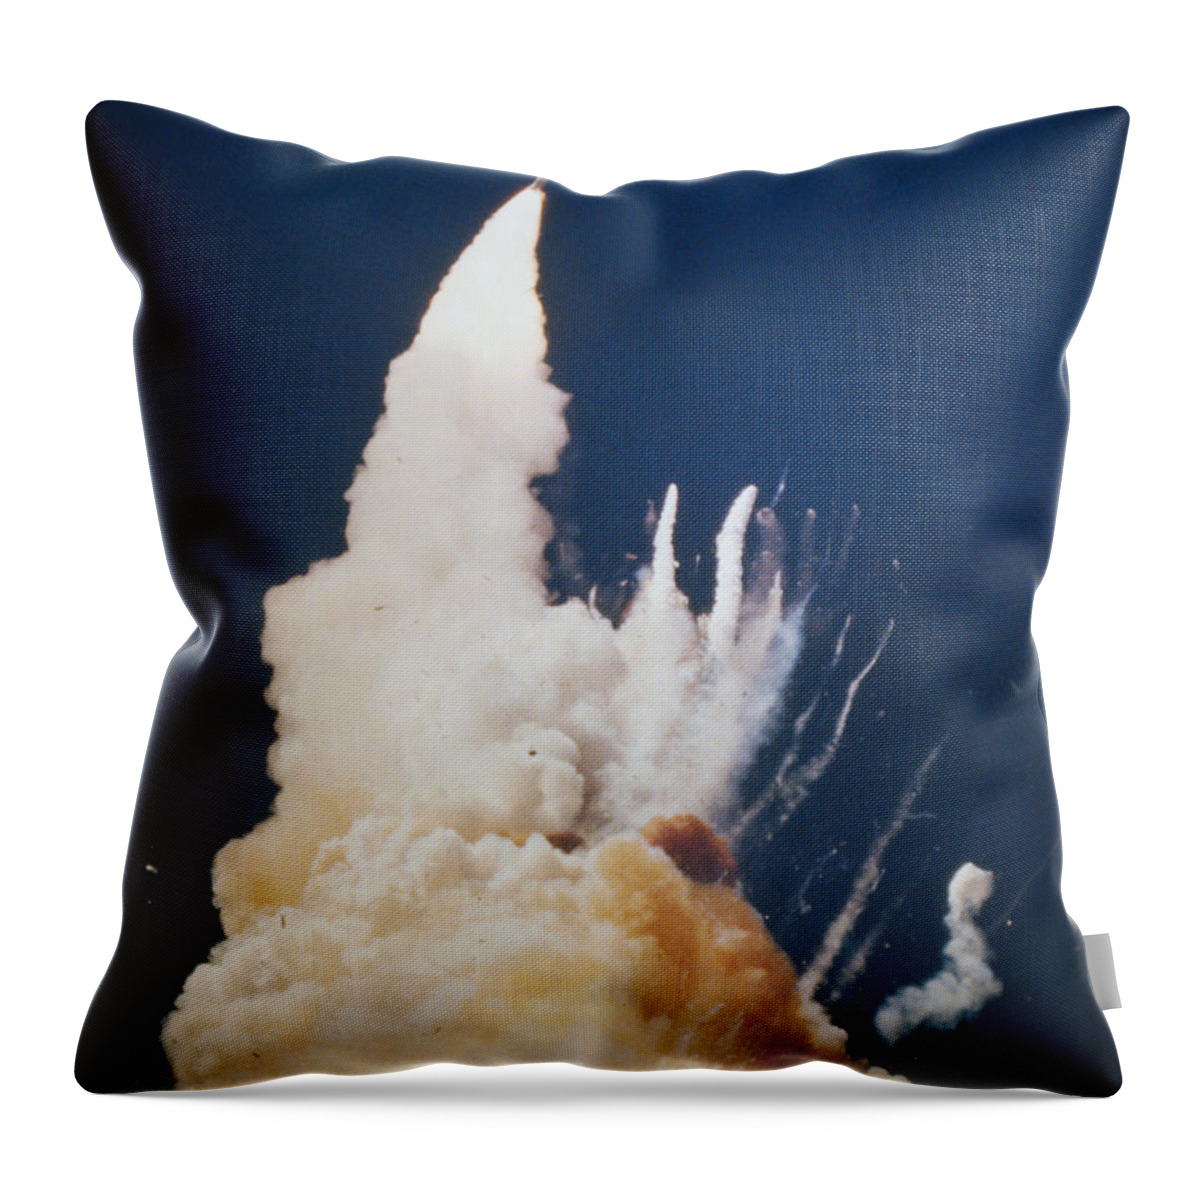 Science Throw Pillow featuring the photograph Space Shuttle Challenger Disaster #1 by NASA Science Source